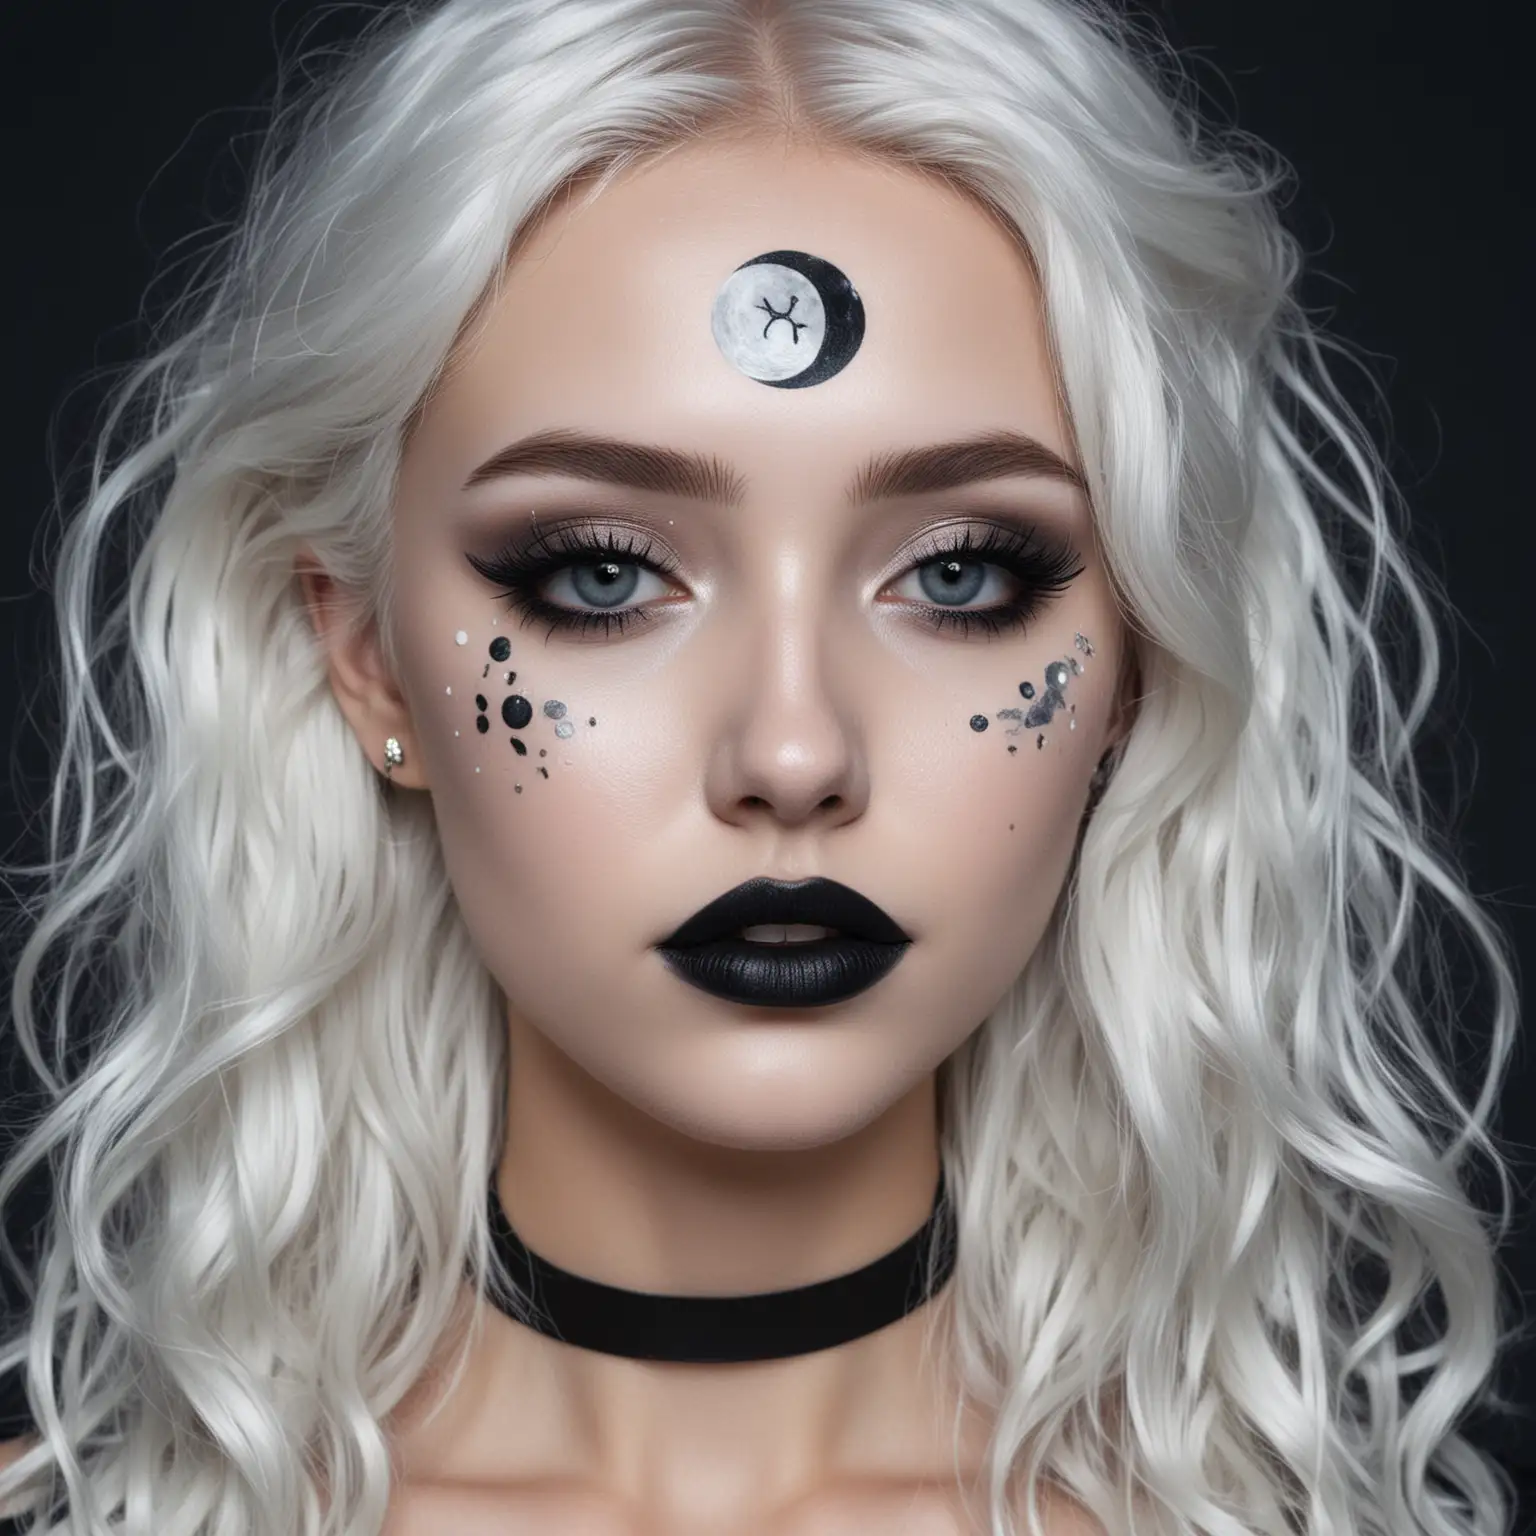 Mystical-Girl-with-Inverted-Moon-Symbol-and-Long-White-Hair